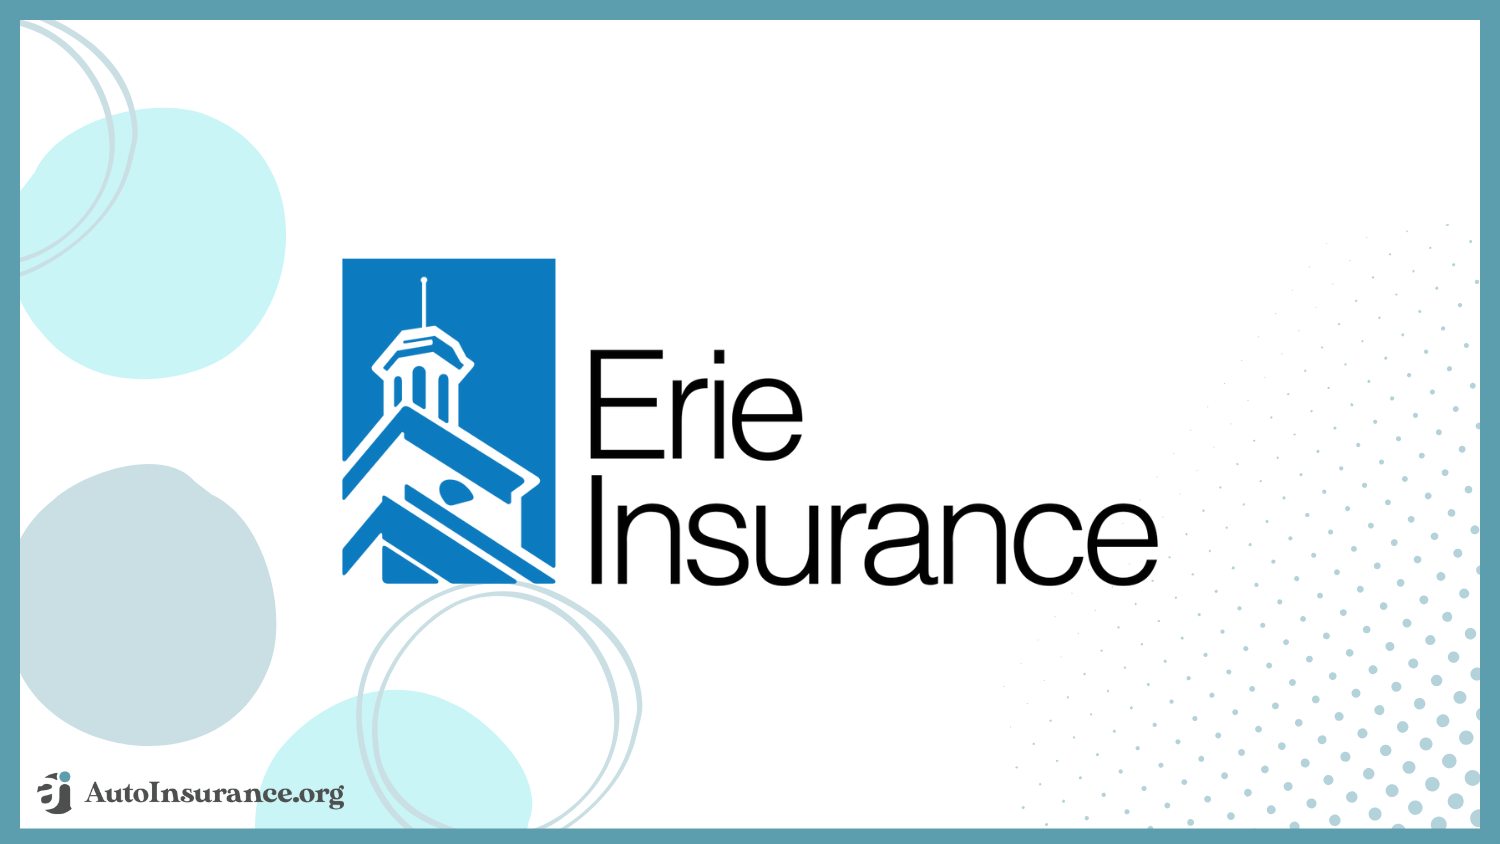 Erie: Best Pay-As-You-Go Auto Insurance in Florida